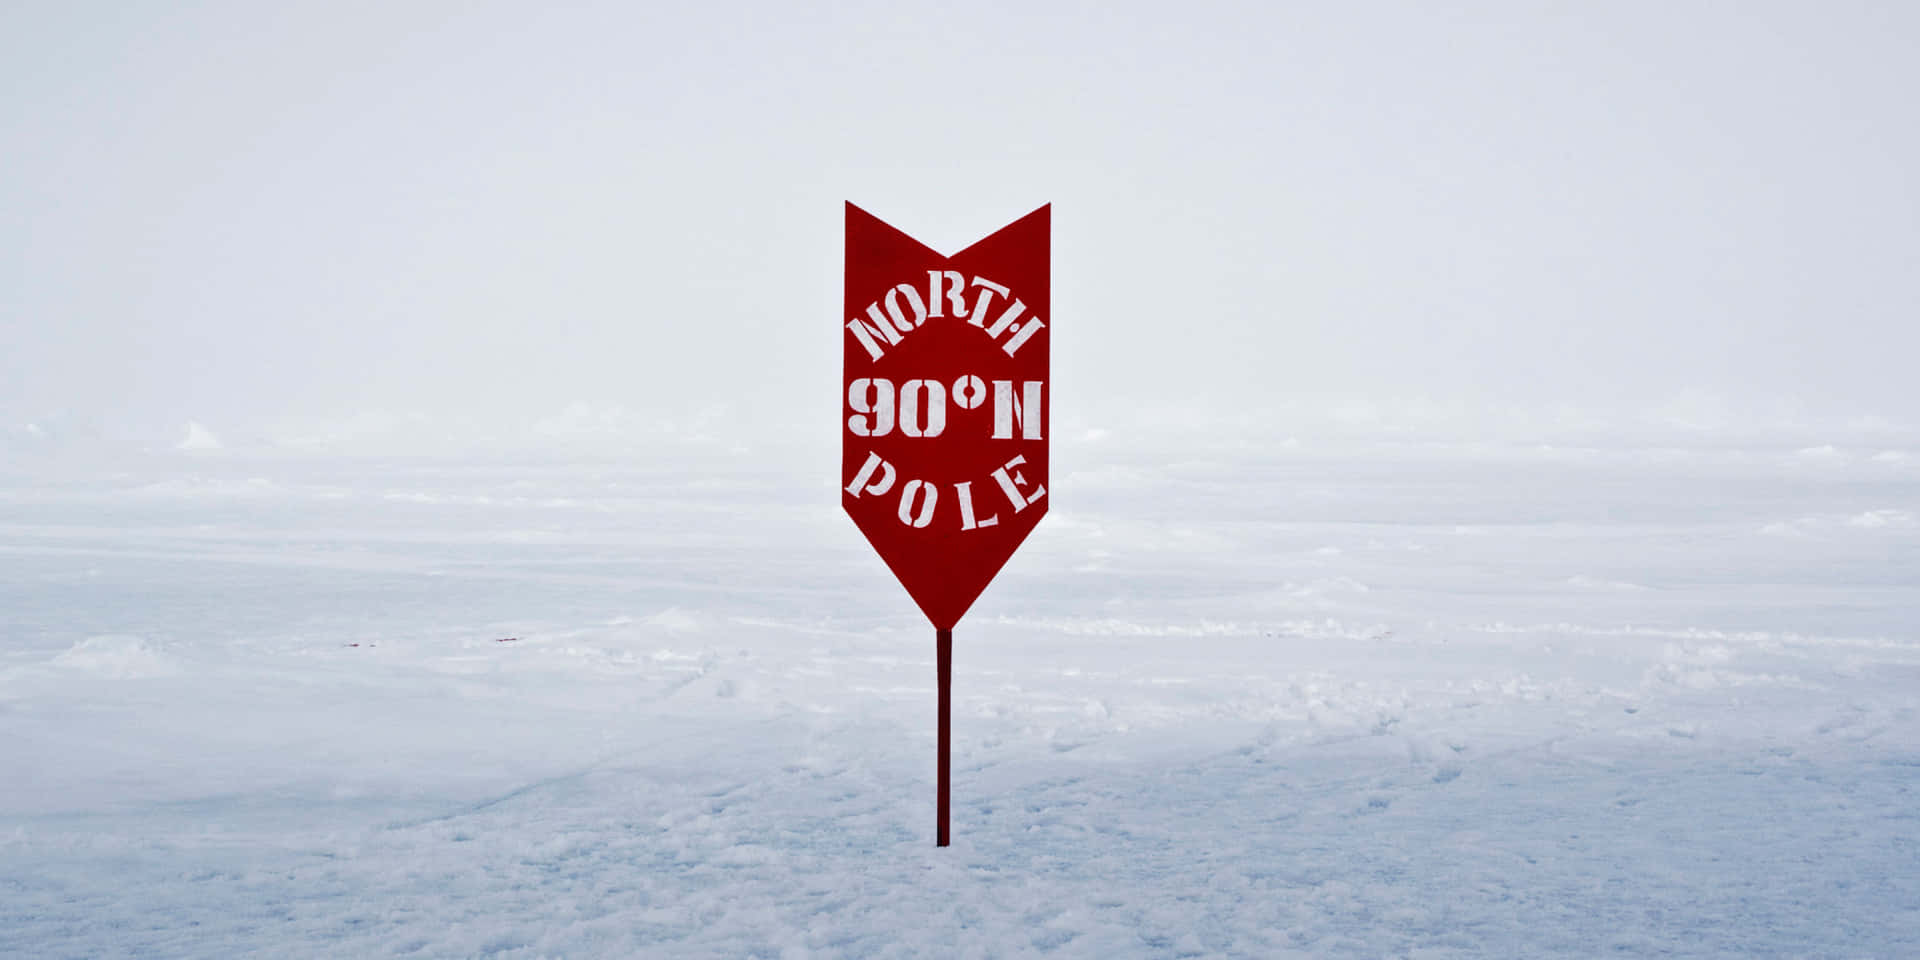 A Red Sign With The Words North Pole